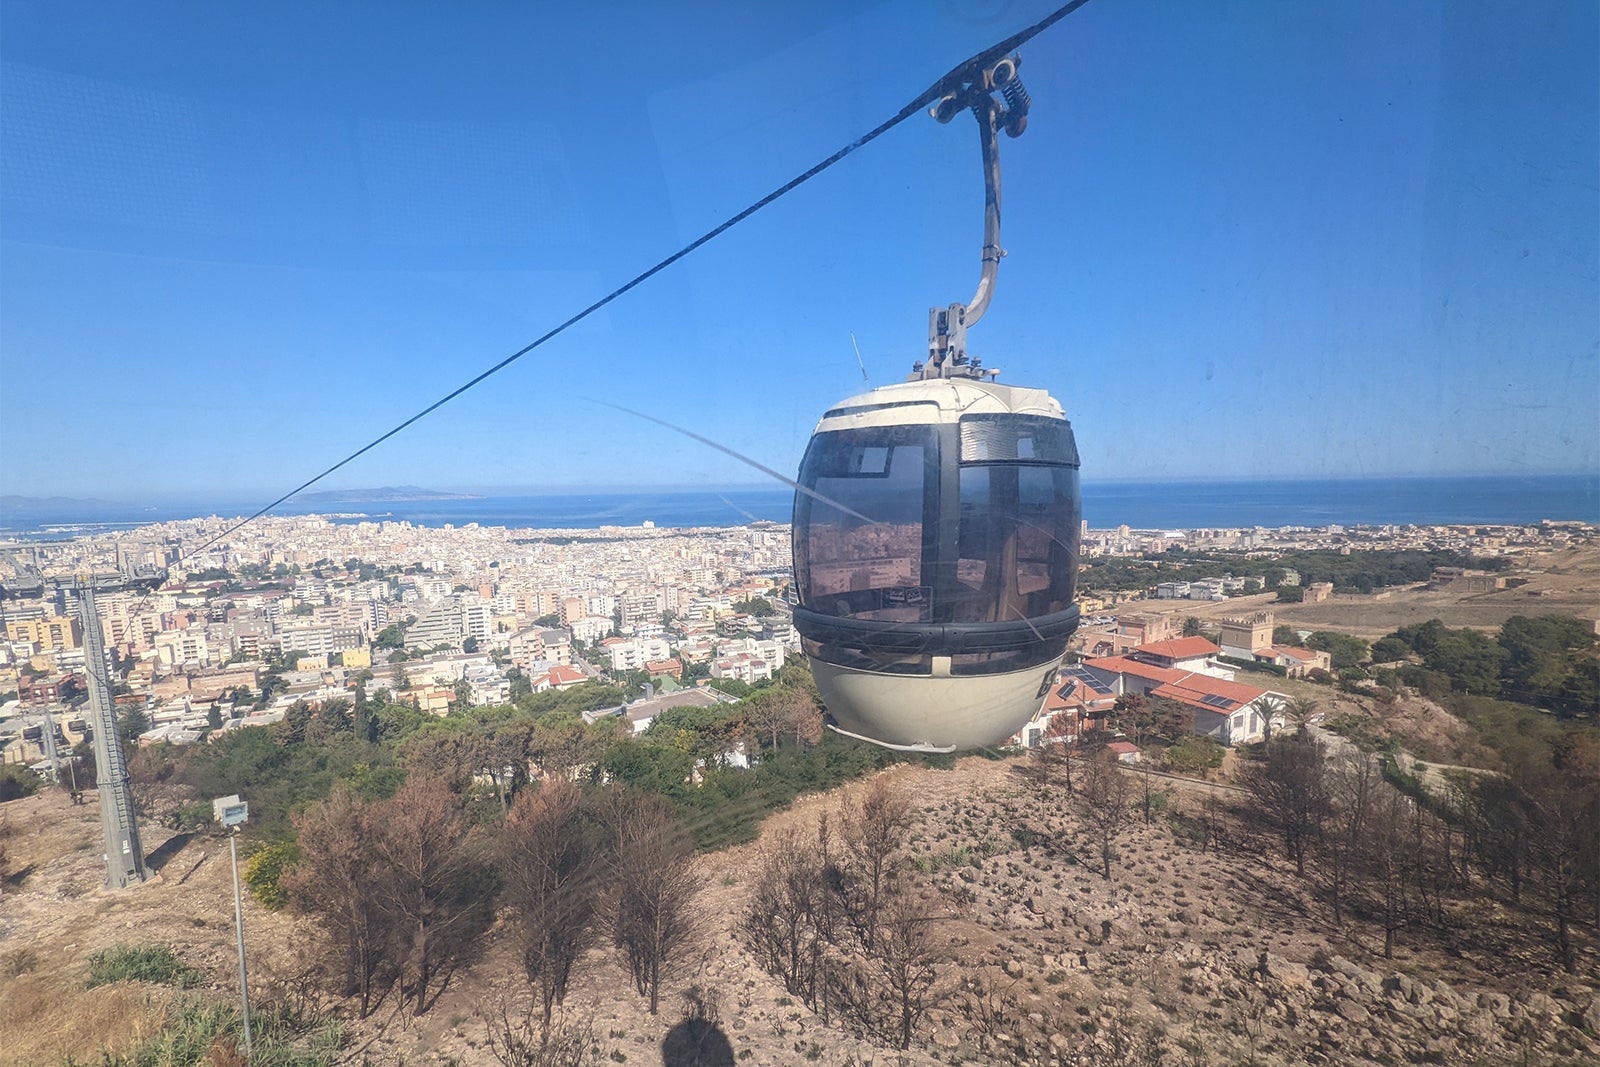 Cable car with sea views in the background in Italy